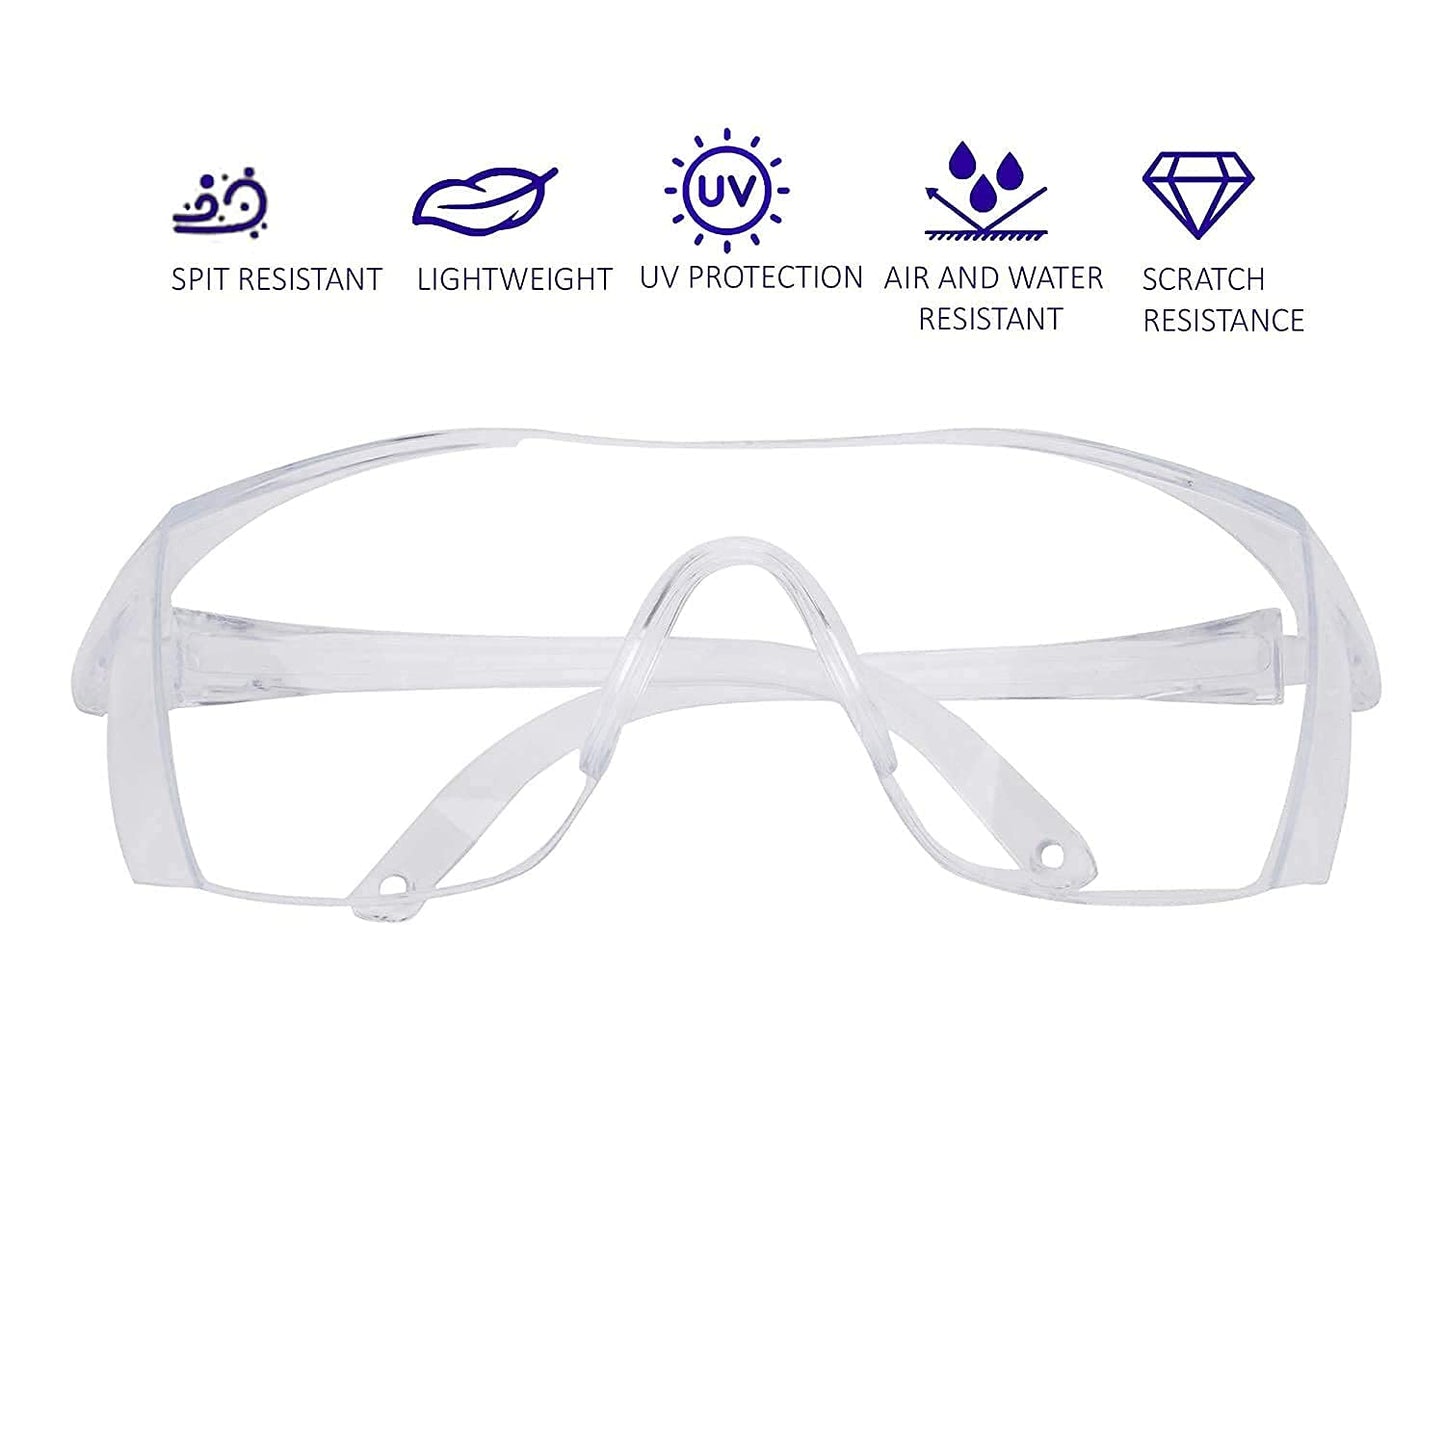 EYESafety Economy Safety Goggles Eye Protection Scratch Resistant Light Weight Polycarbonate Protective Safety Glasses